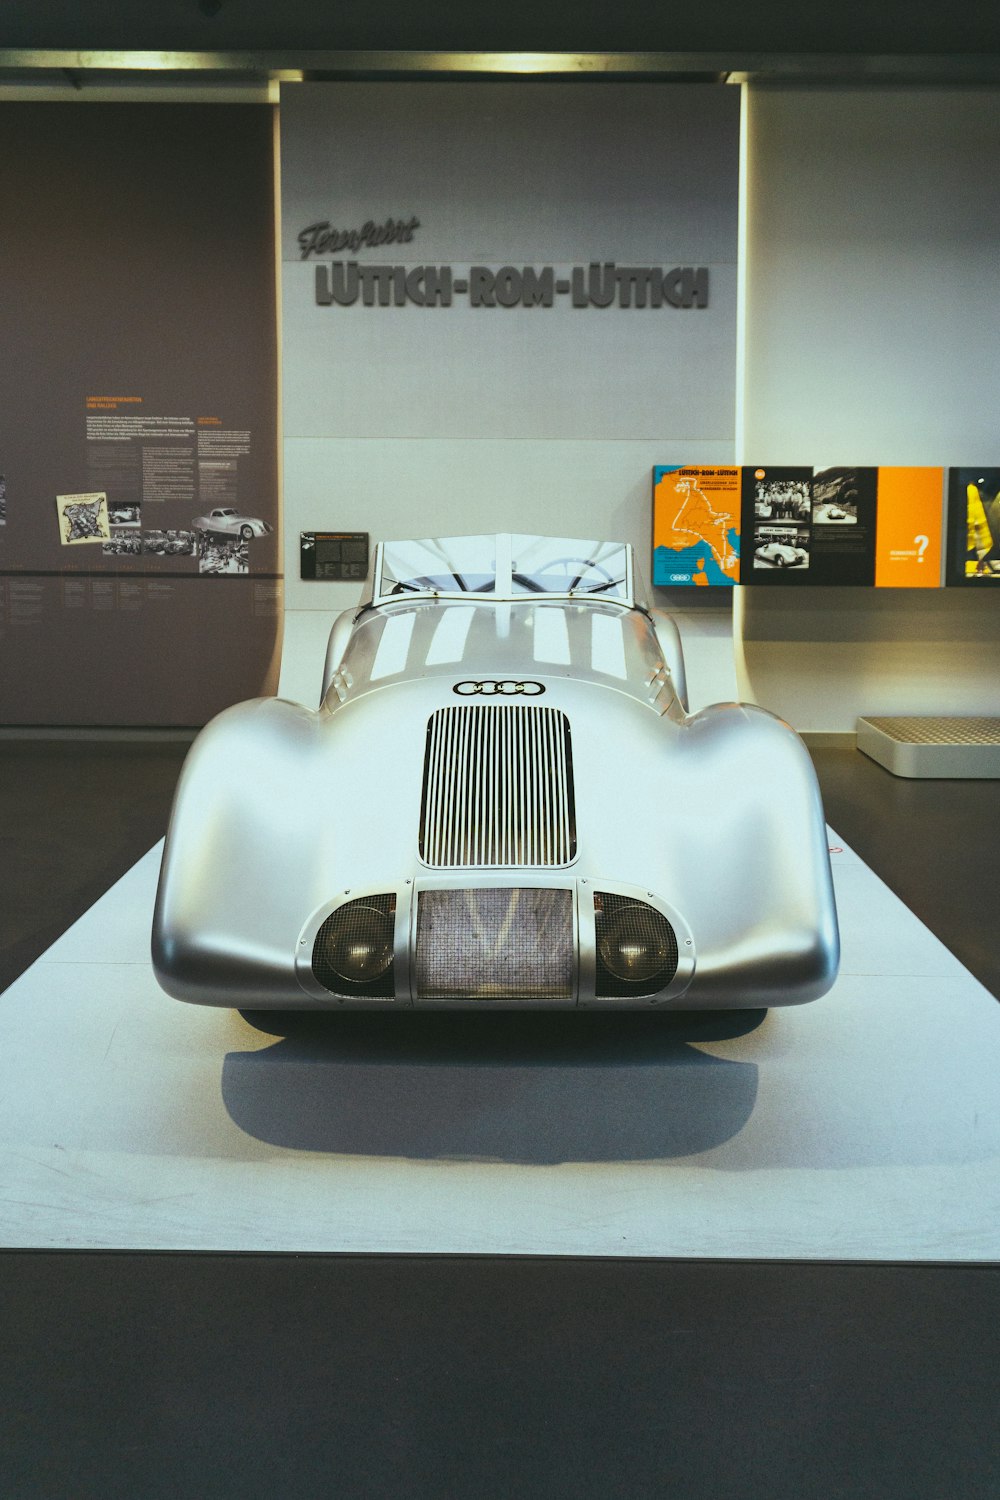 a car is on display in a museum